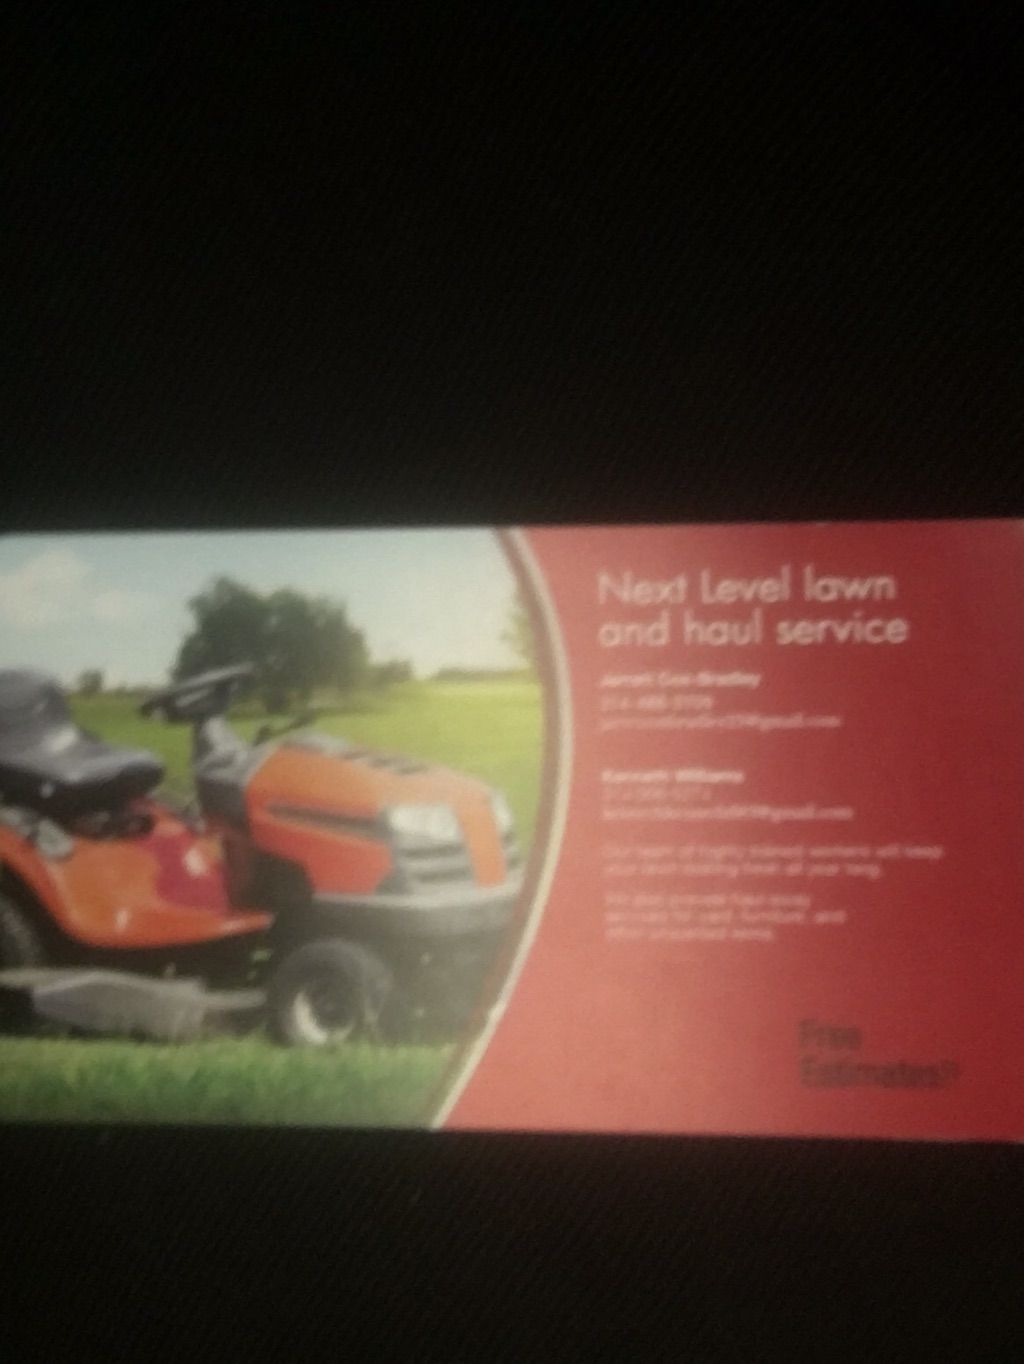 Next level hauling and lawn services